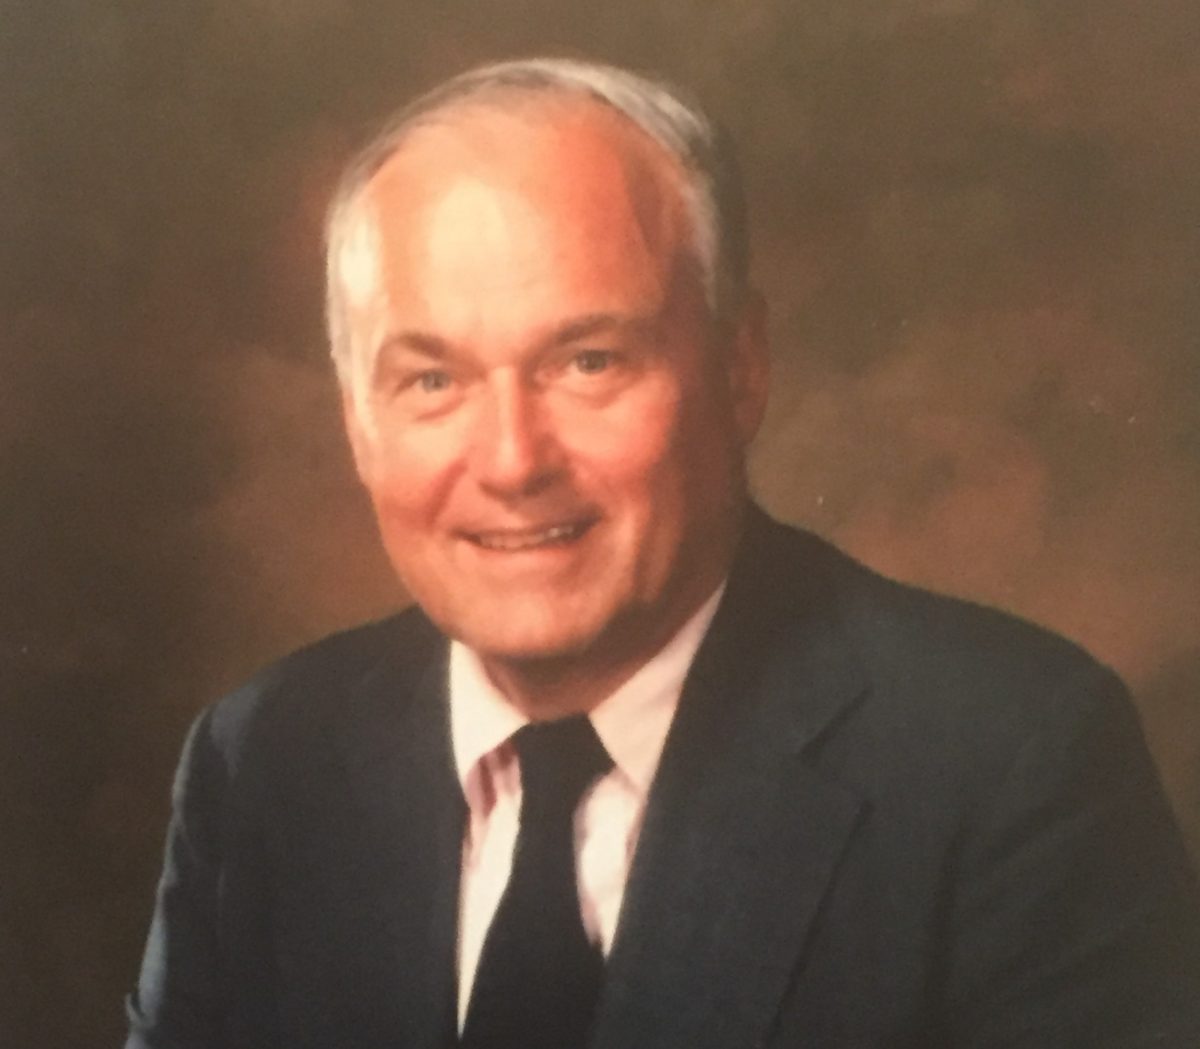 Ernest Monrad, a Pioneer in the High Yield Bond Market and the Longest-Serving Fund Manager, Passes Away at 90